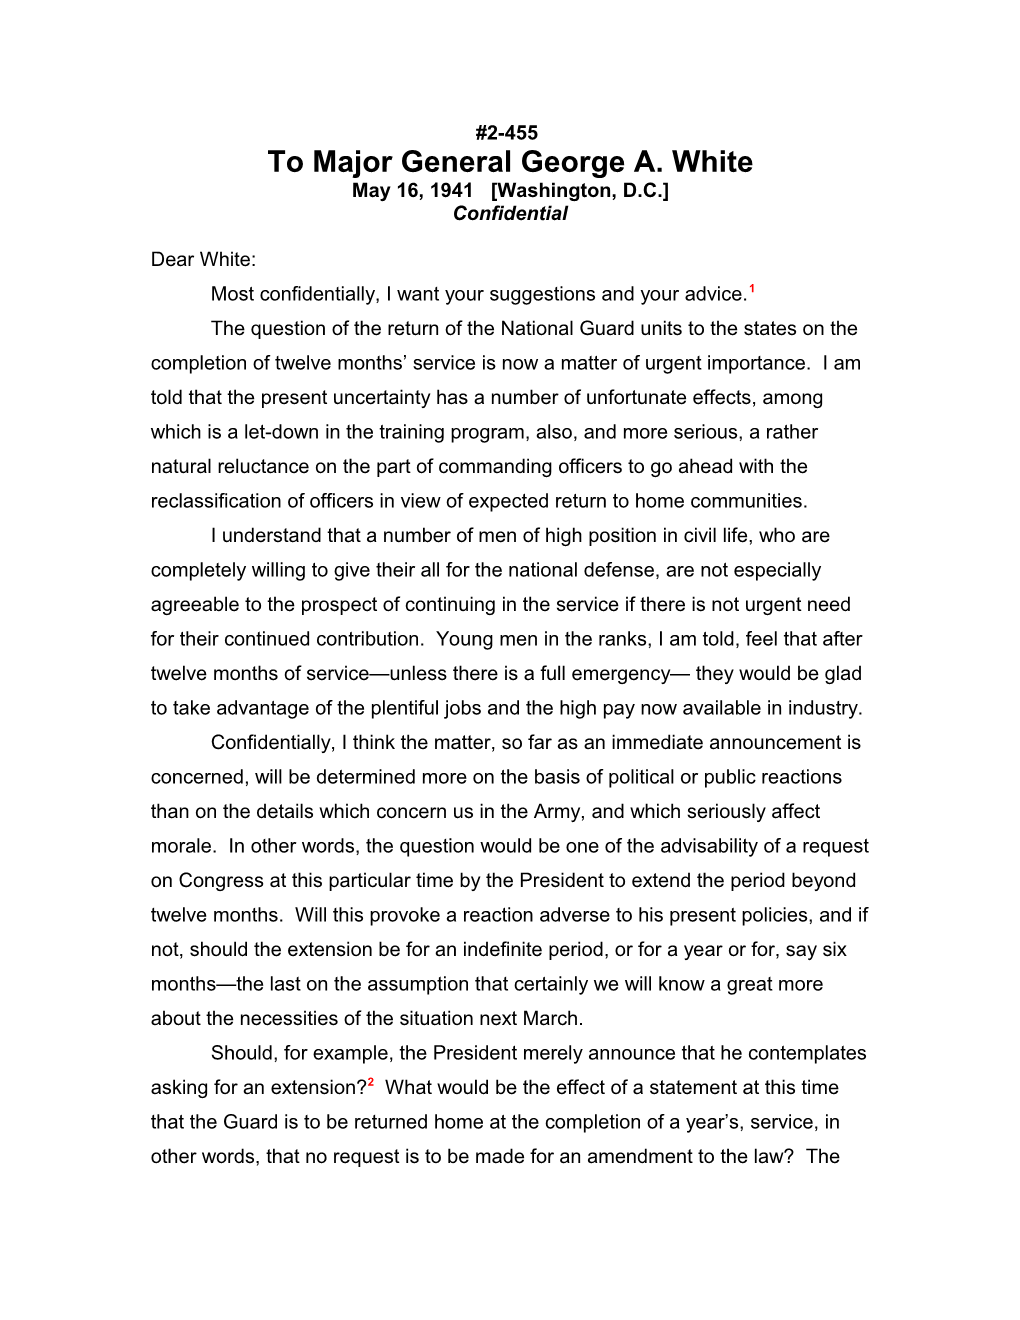 To Major General George A. White